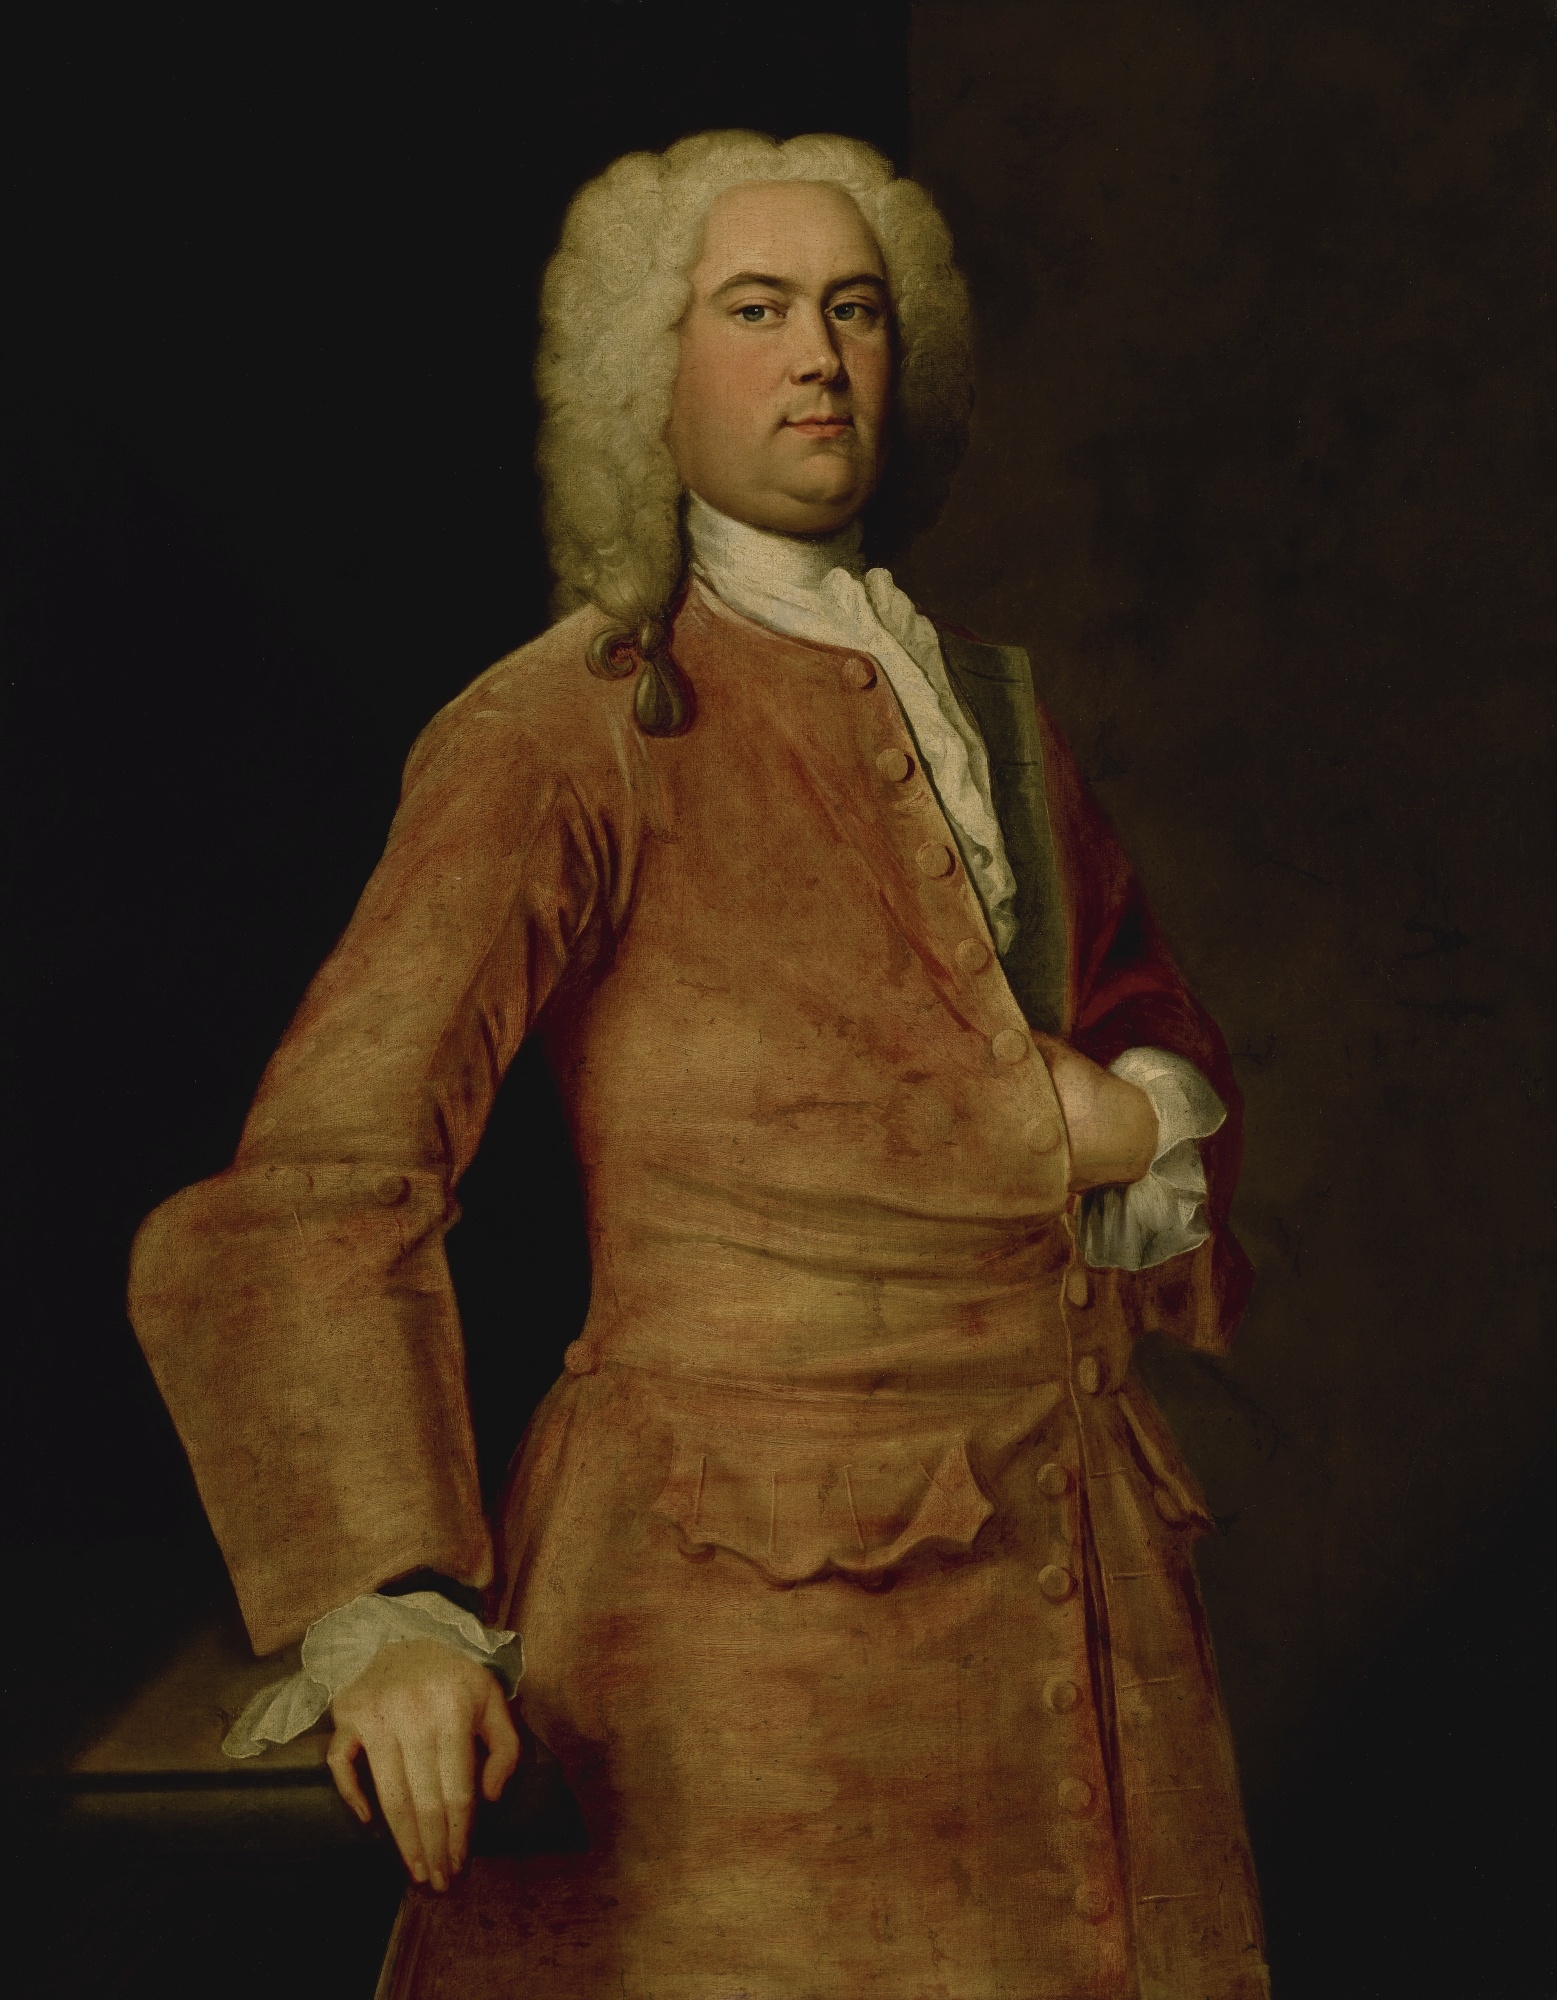 PORTRAIT OF A MAN IN A RED COAT, KNEE-LENGTH, TRADITIONALLY IDENTIFIED AS GEORGE FREDERICK HANDEL